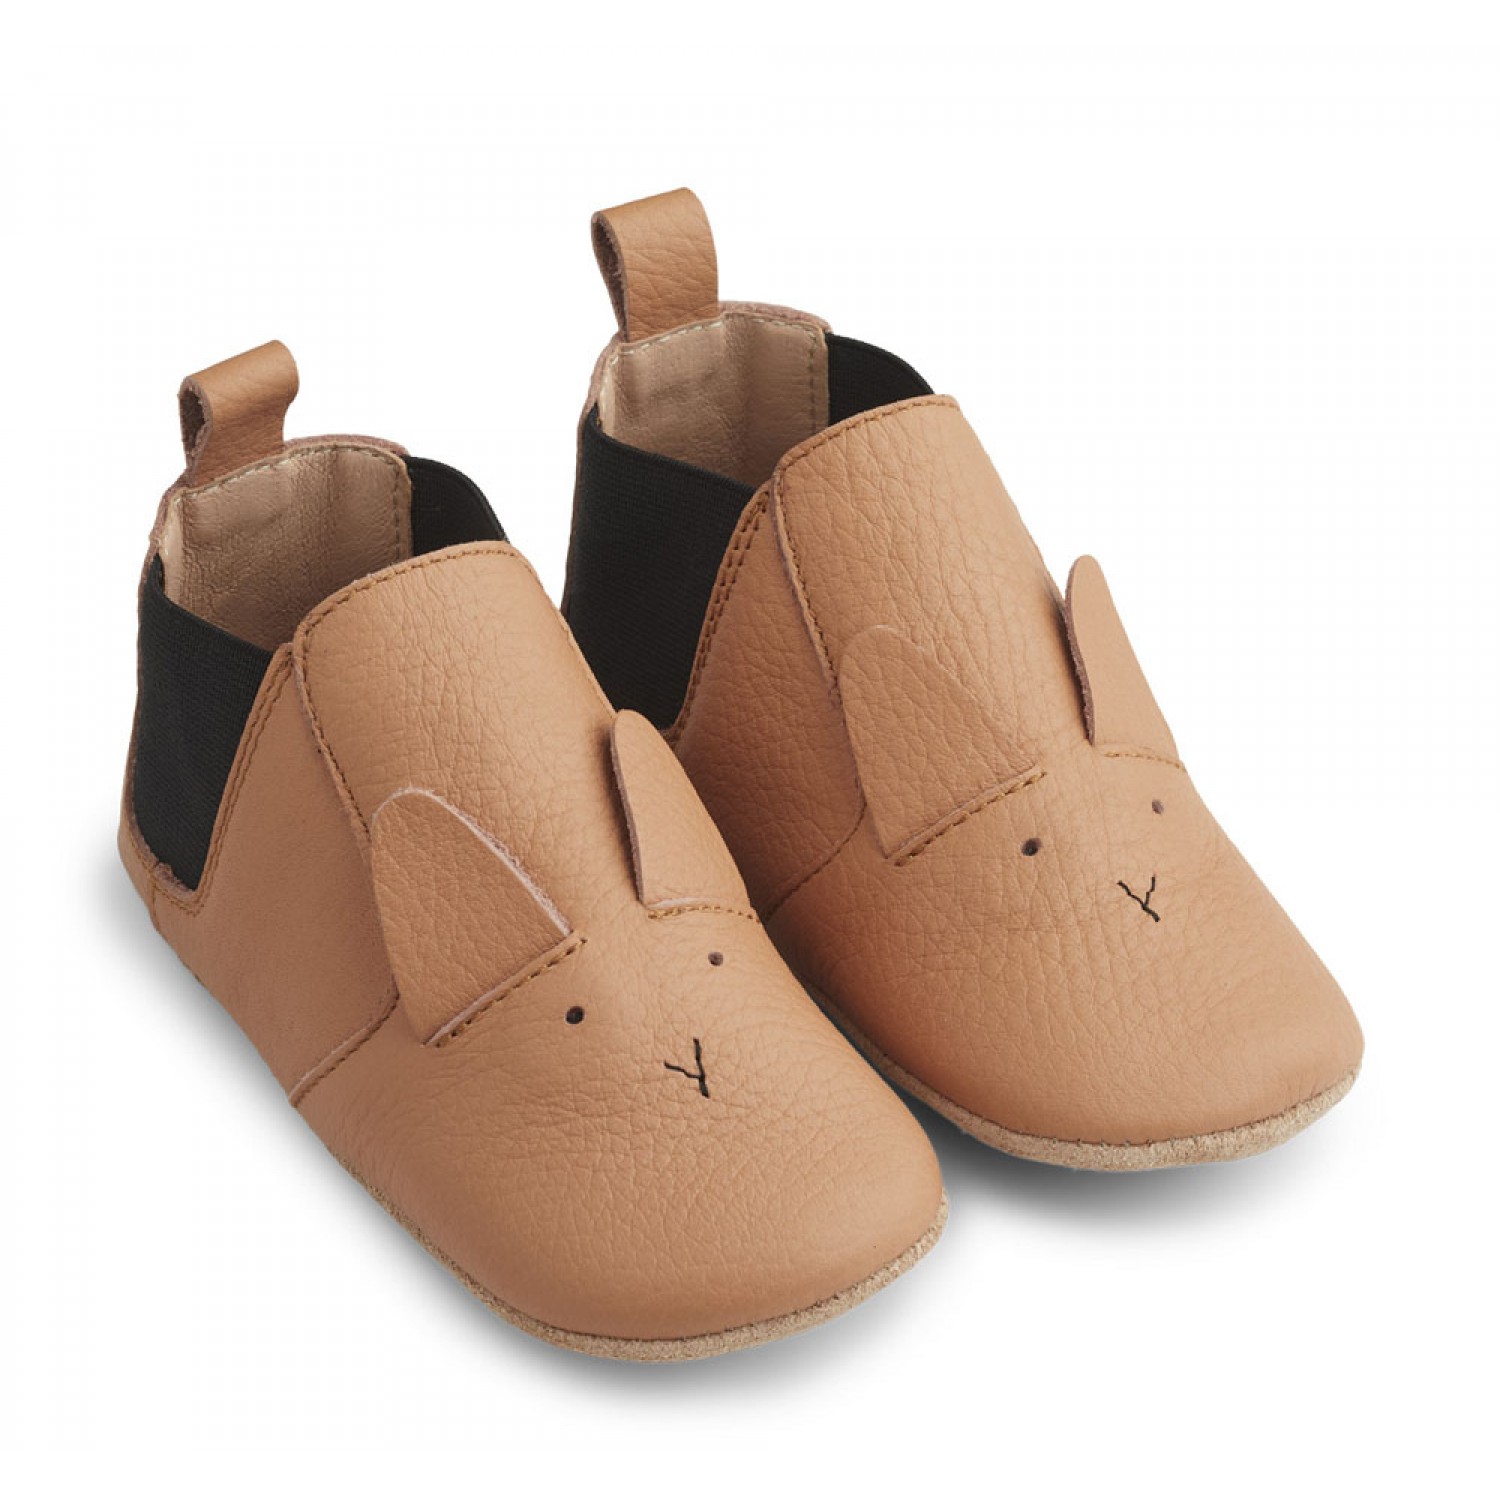 Edith Leather Slippers | Rabbit tuscany rose